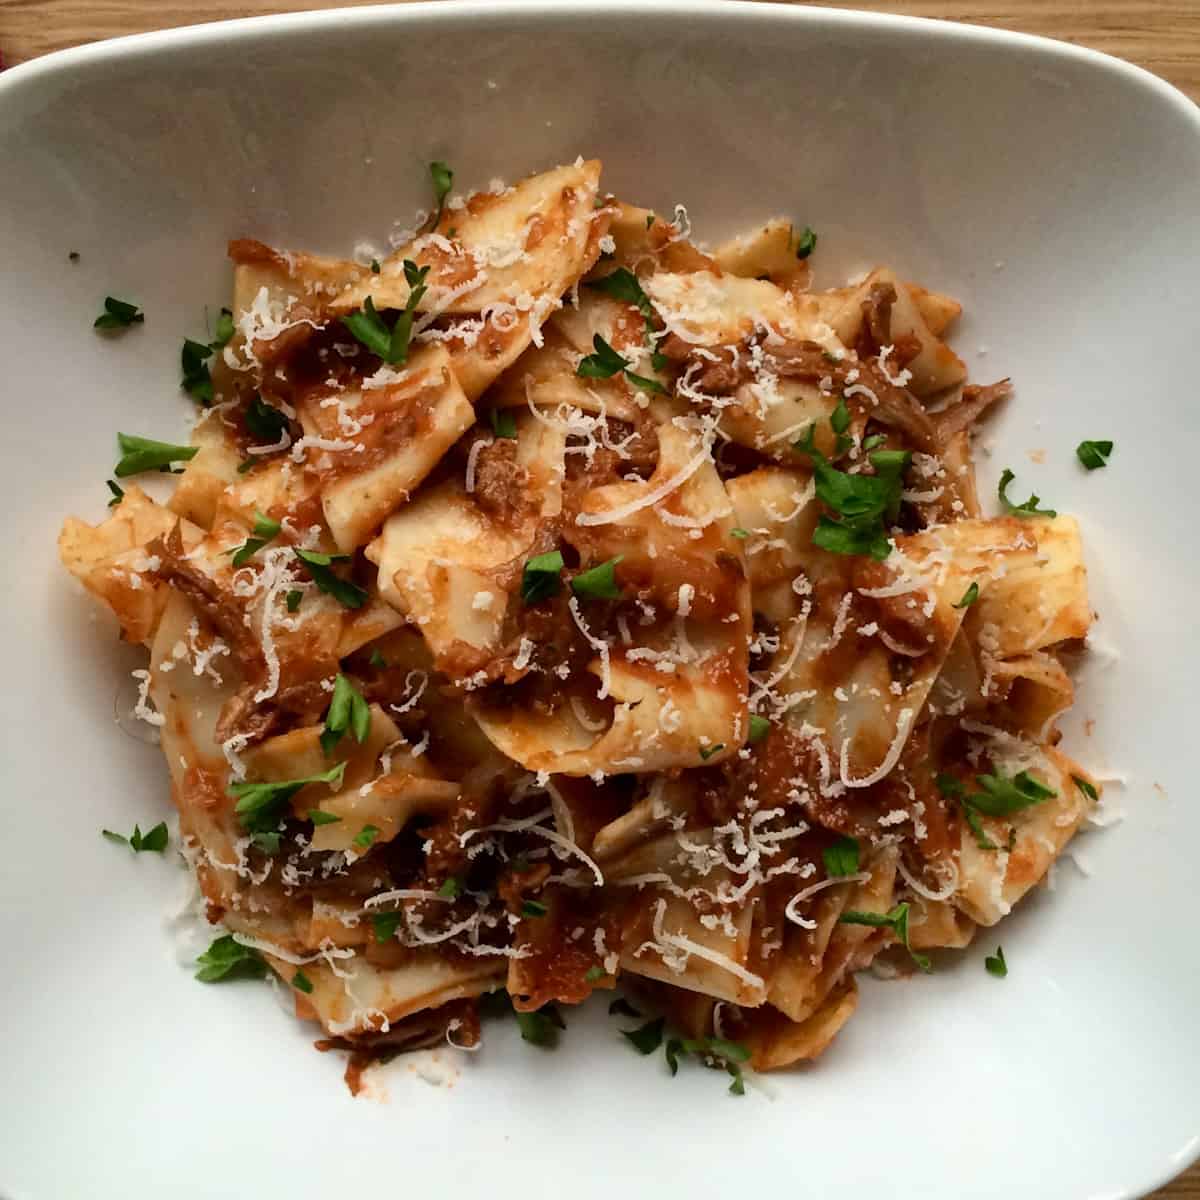 Short rib ragu with pappardelle pasta in a bowl topped with herbs.